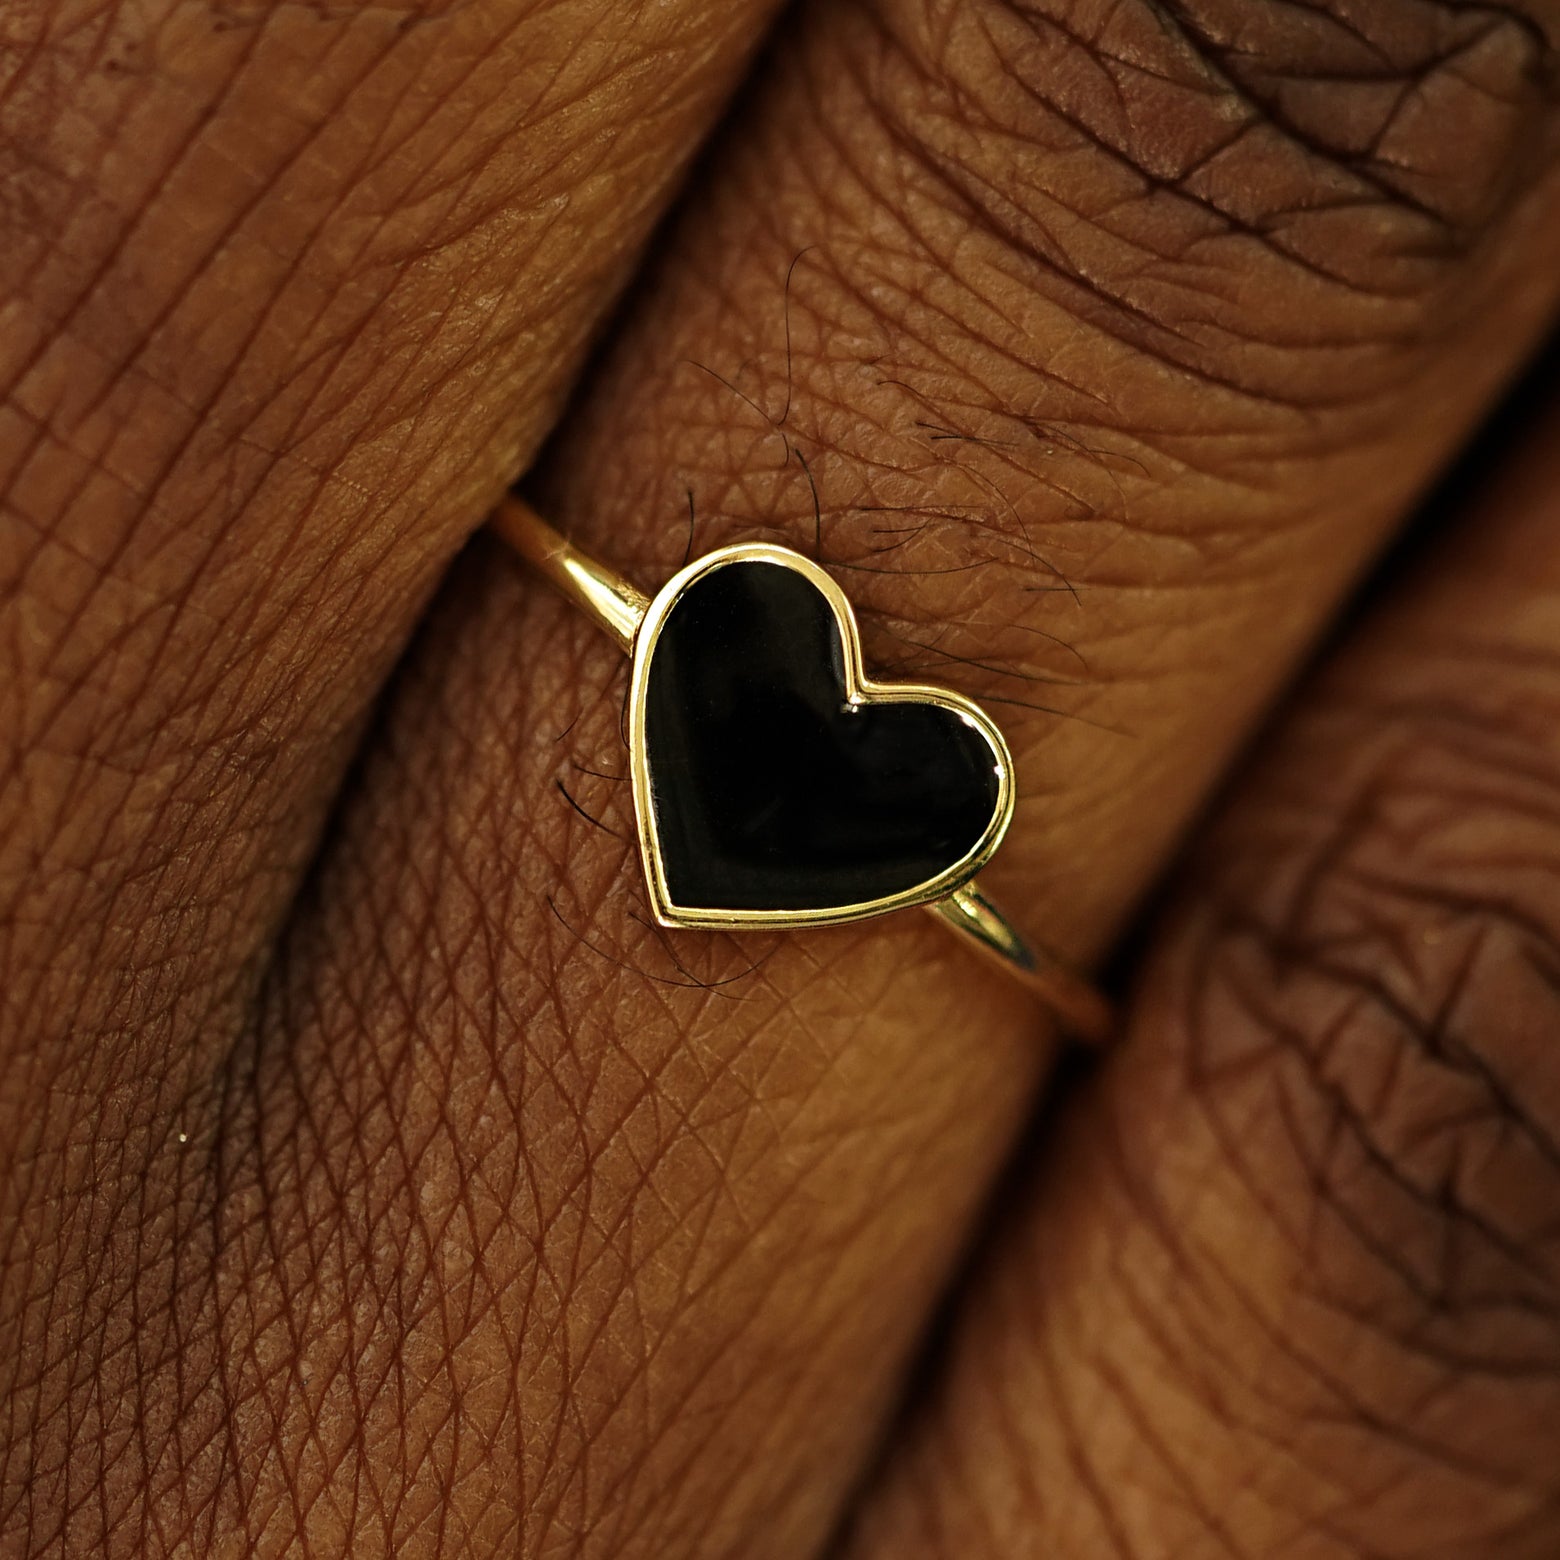 Close up view of a model's fingers wearing a 14k gold black enamel heart ring